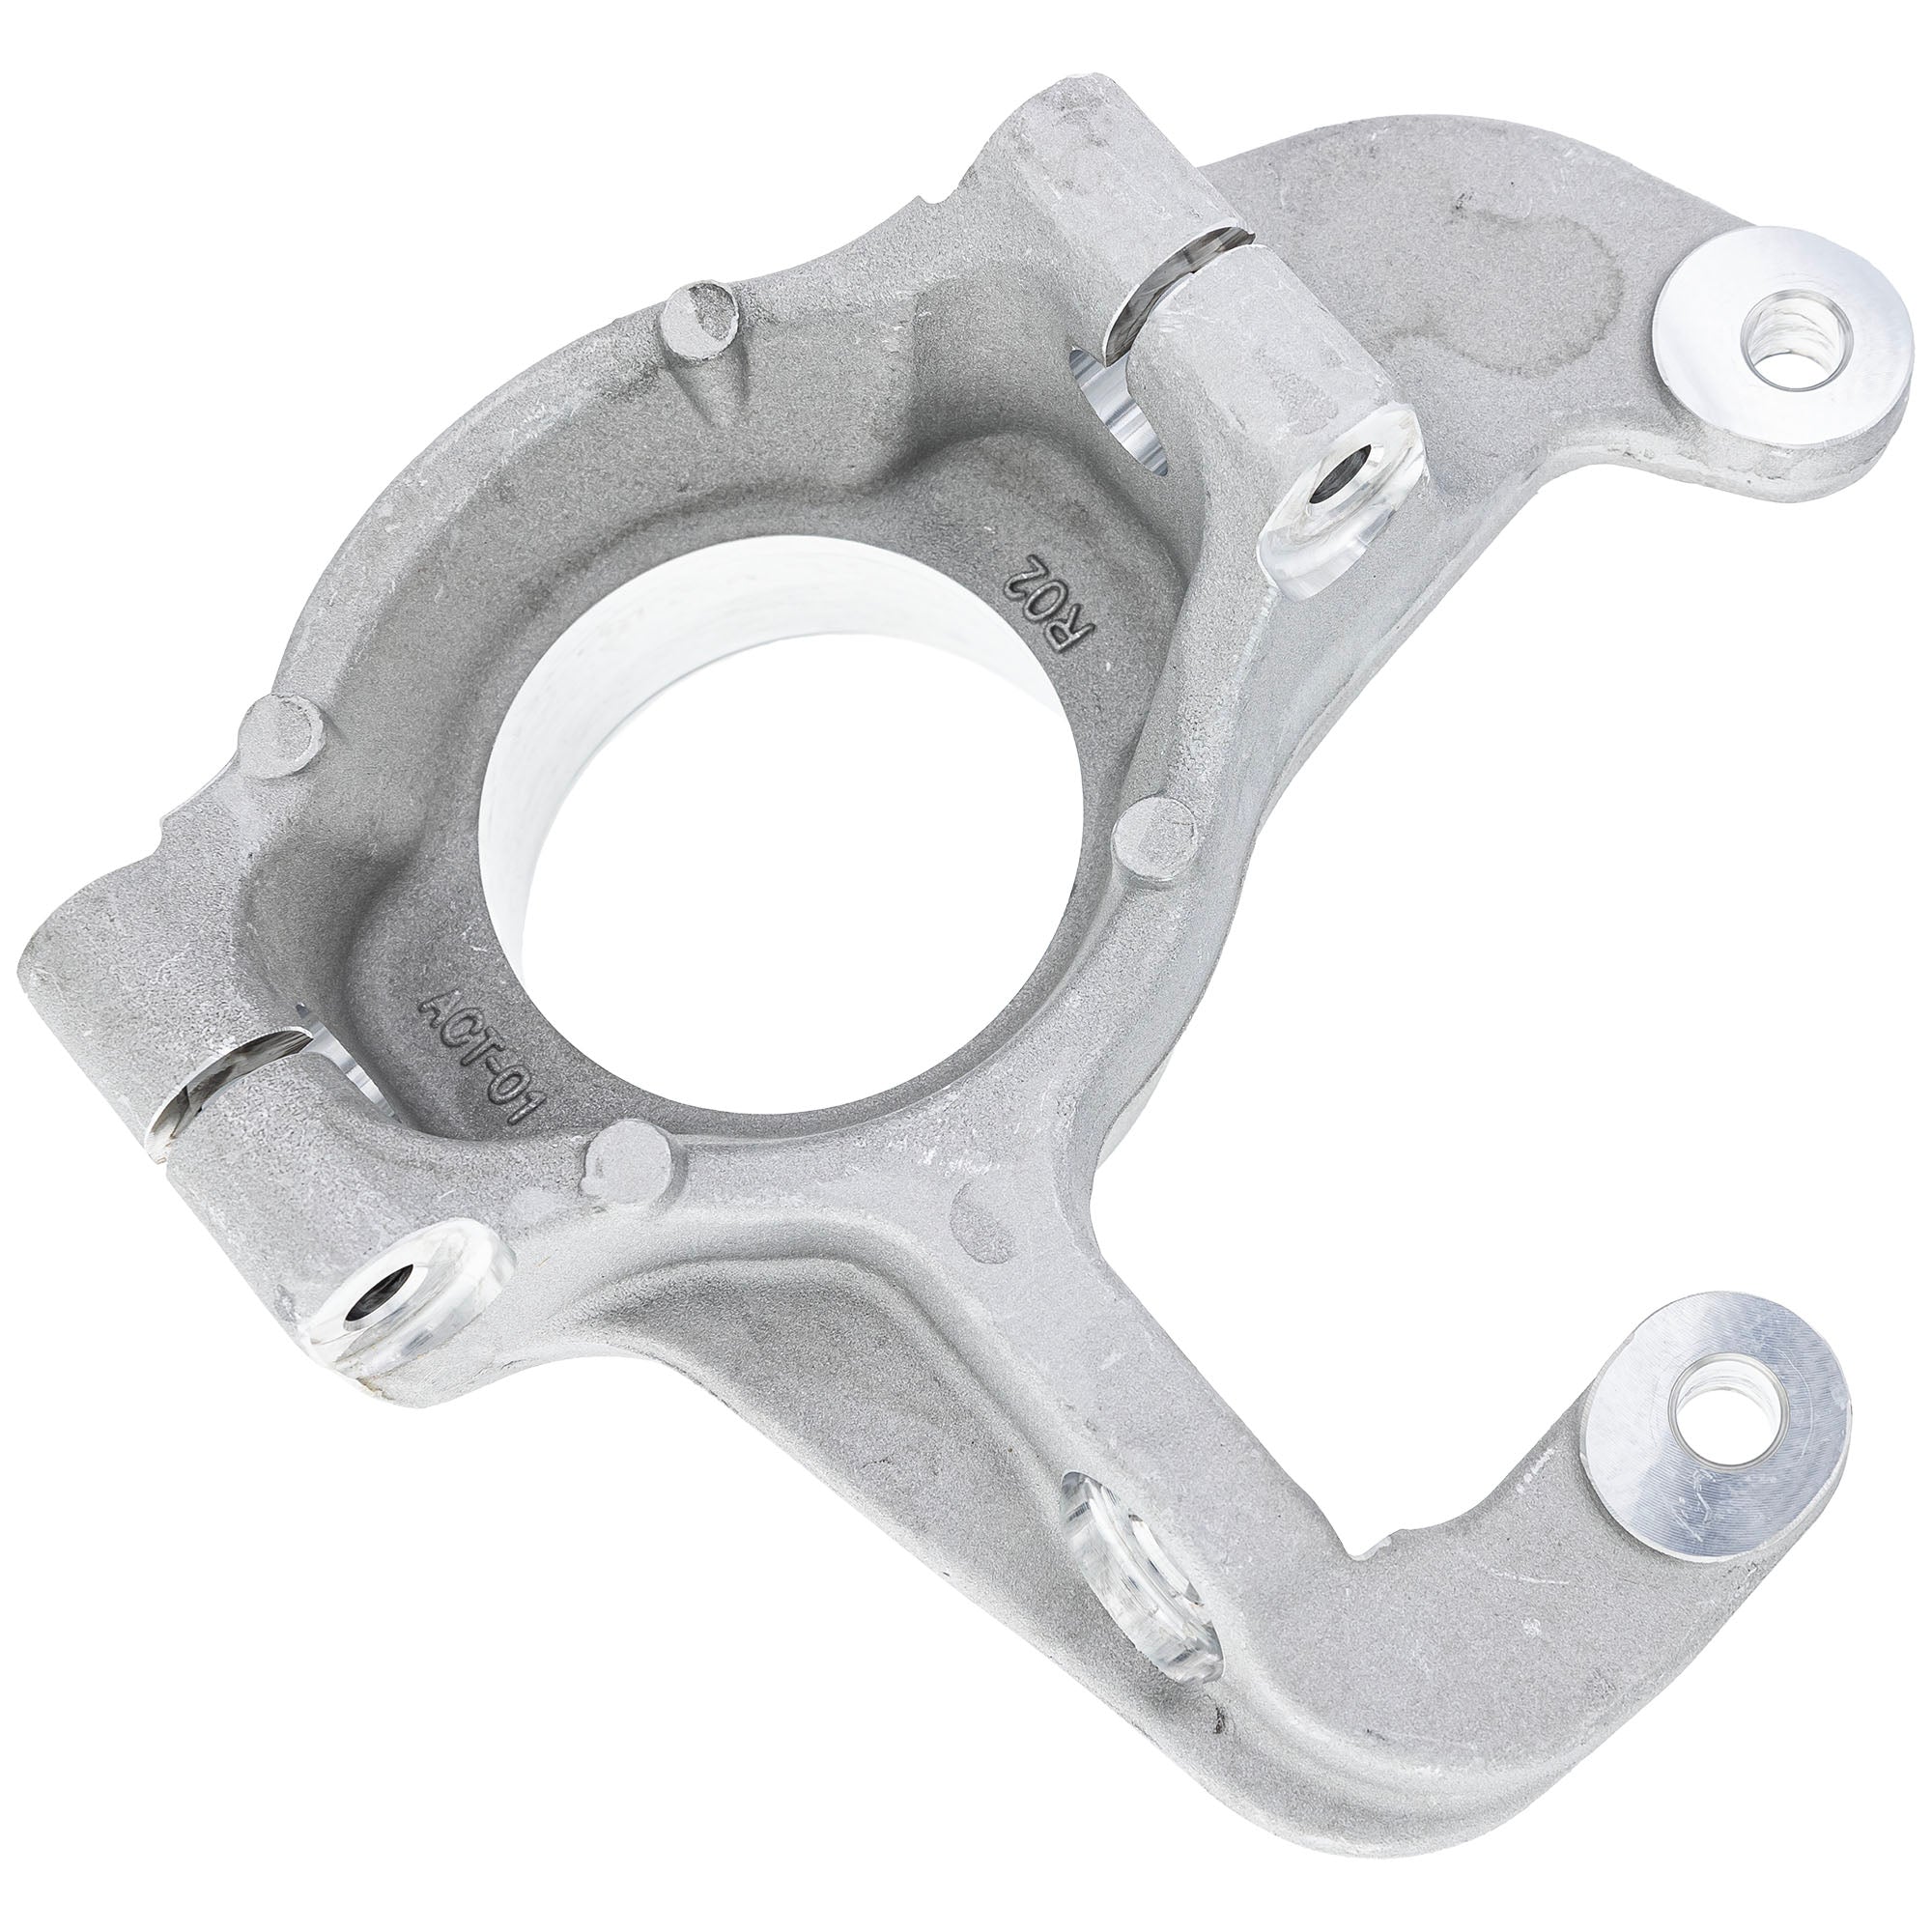 Polaris 5143614 Machined Right Steering Knuckle